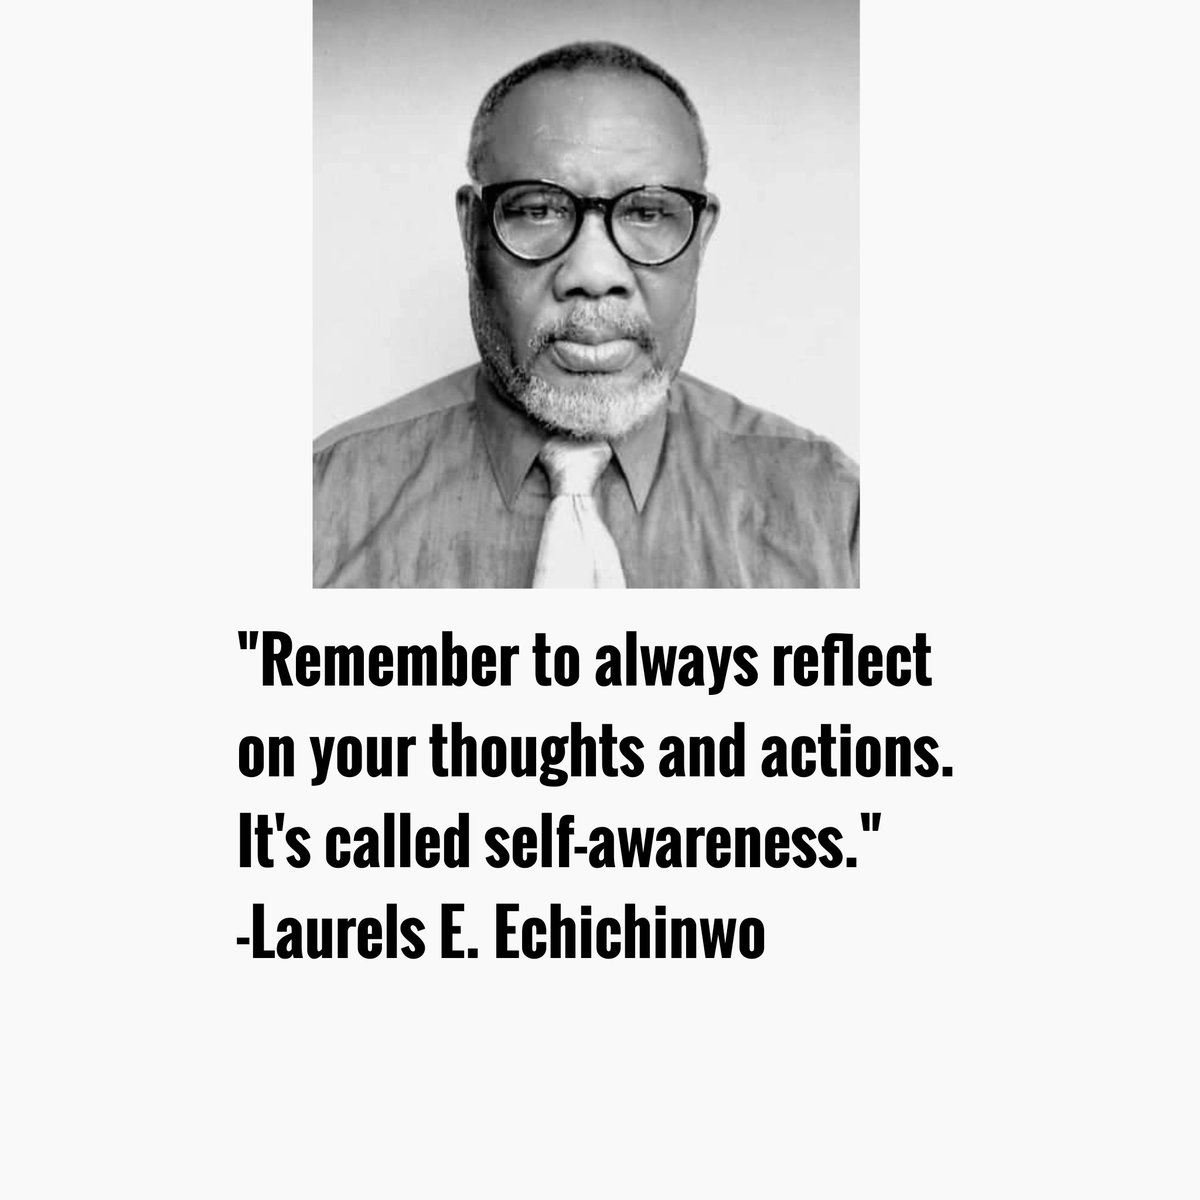 'Remember to always reflect on your thoughts and actions. It's called self-awareness.' -Laurels E. Echichinwo 
#laurelsechichinwoinspirationalquotes